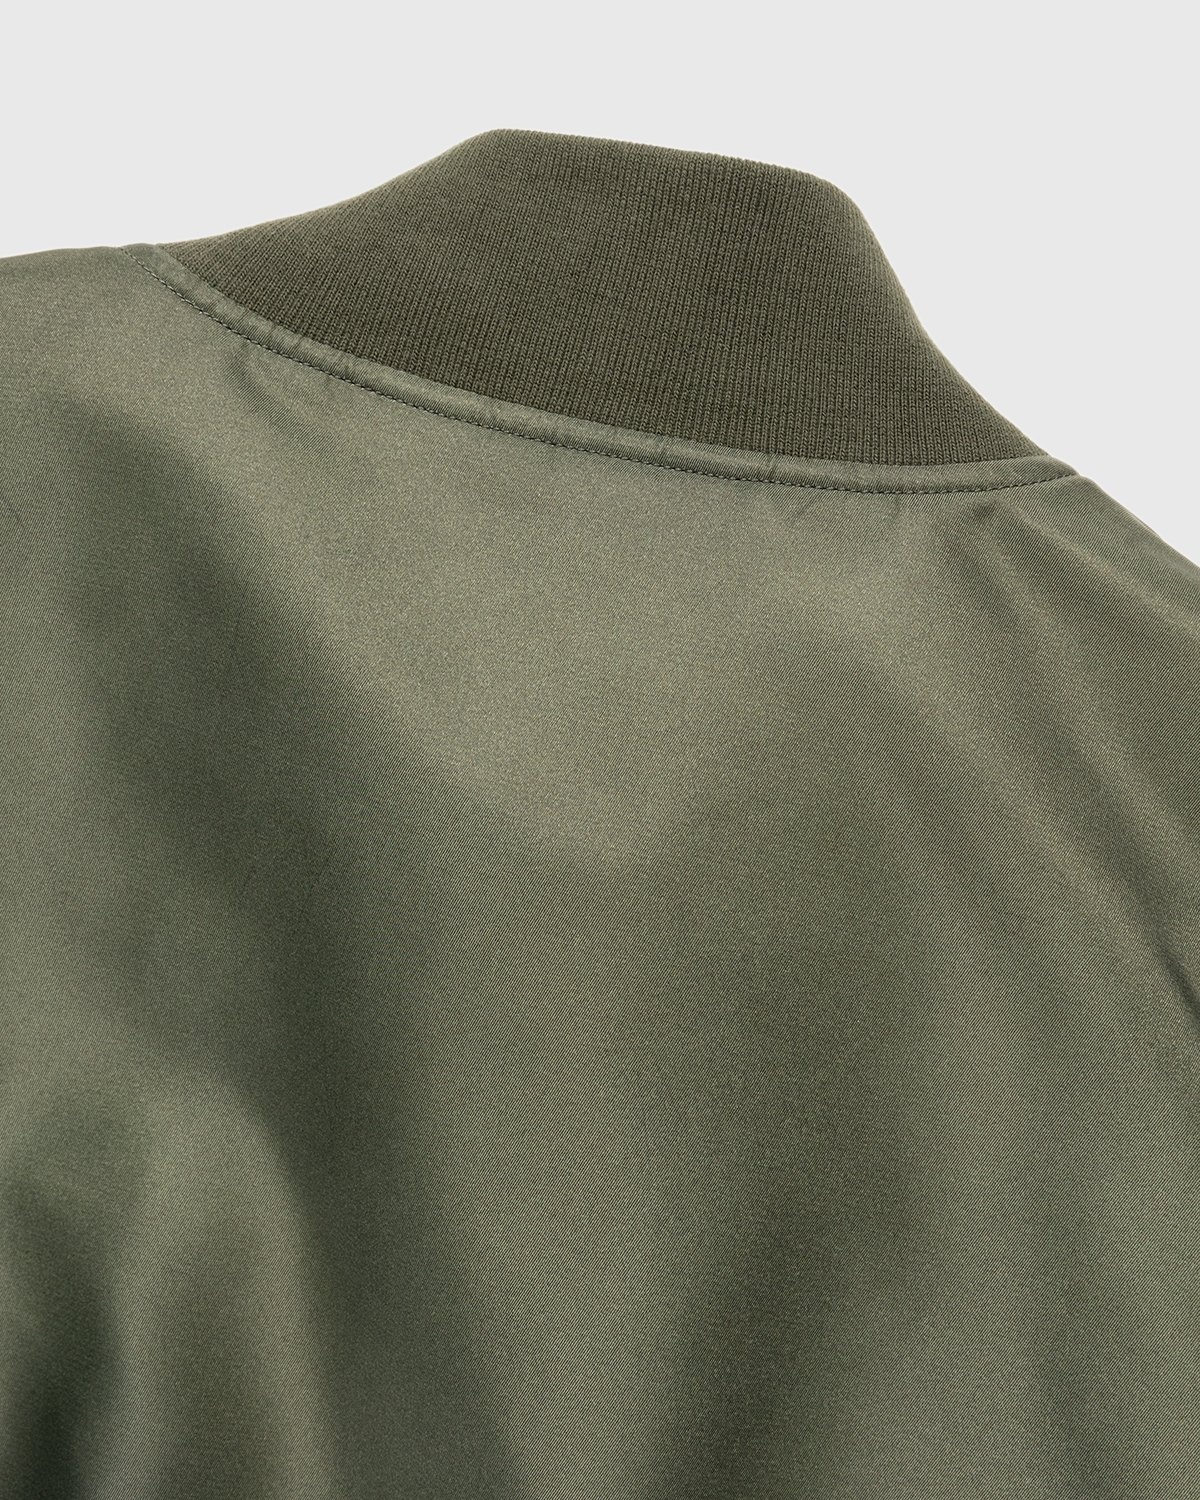 Acne Studios – Satin Bomber Jacket Olive Green - Outerwear - Green - Image 4